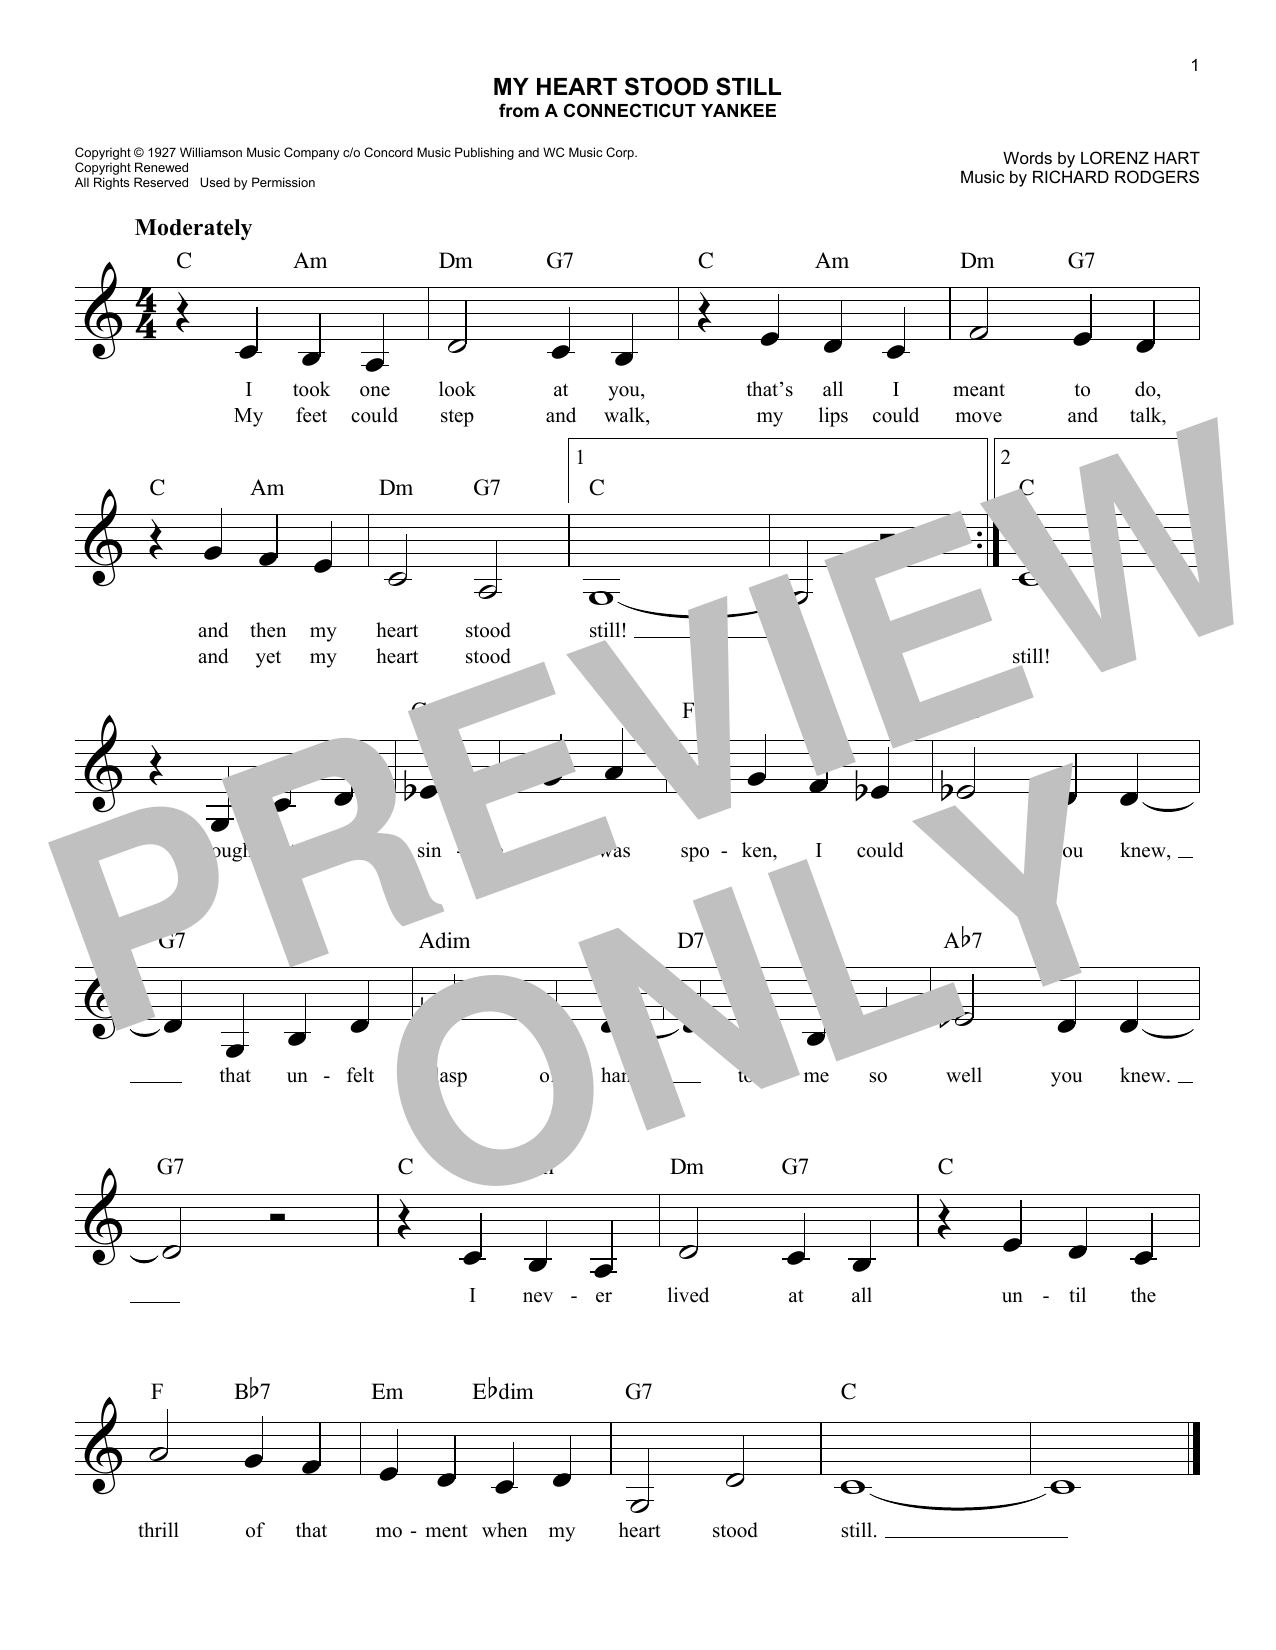 Download Rodgers & Hart My Heart Stood Still (from A Connecticu Sheet Music